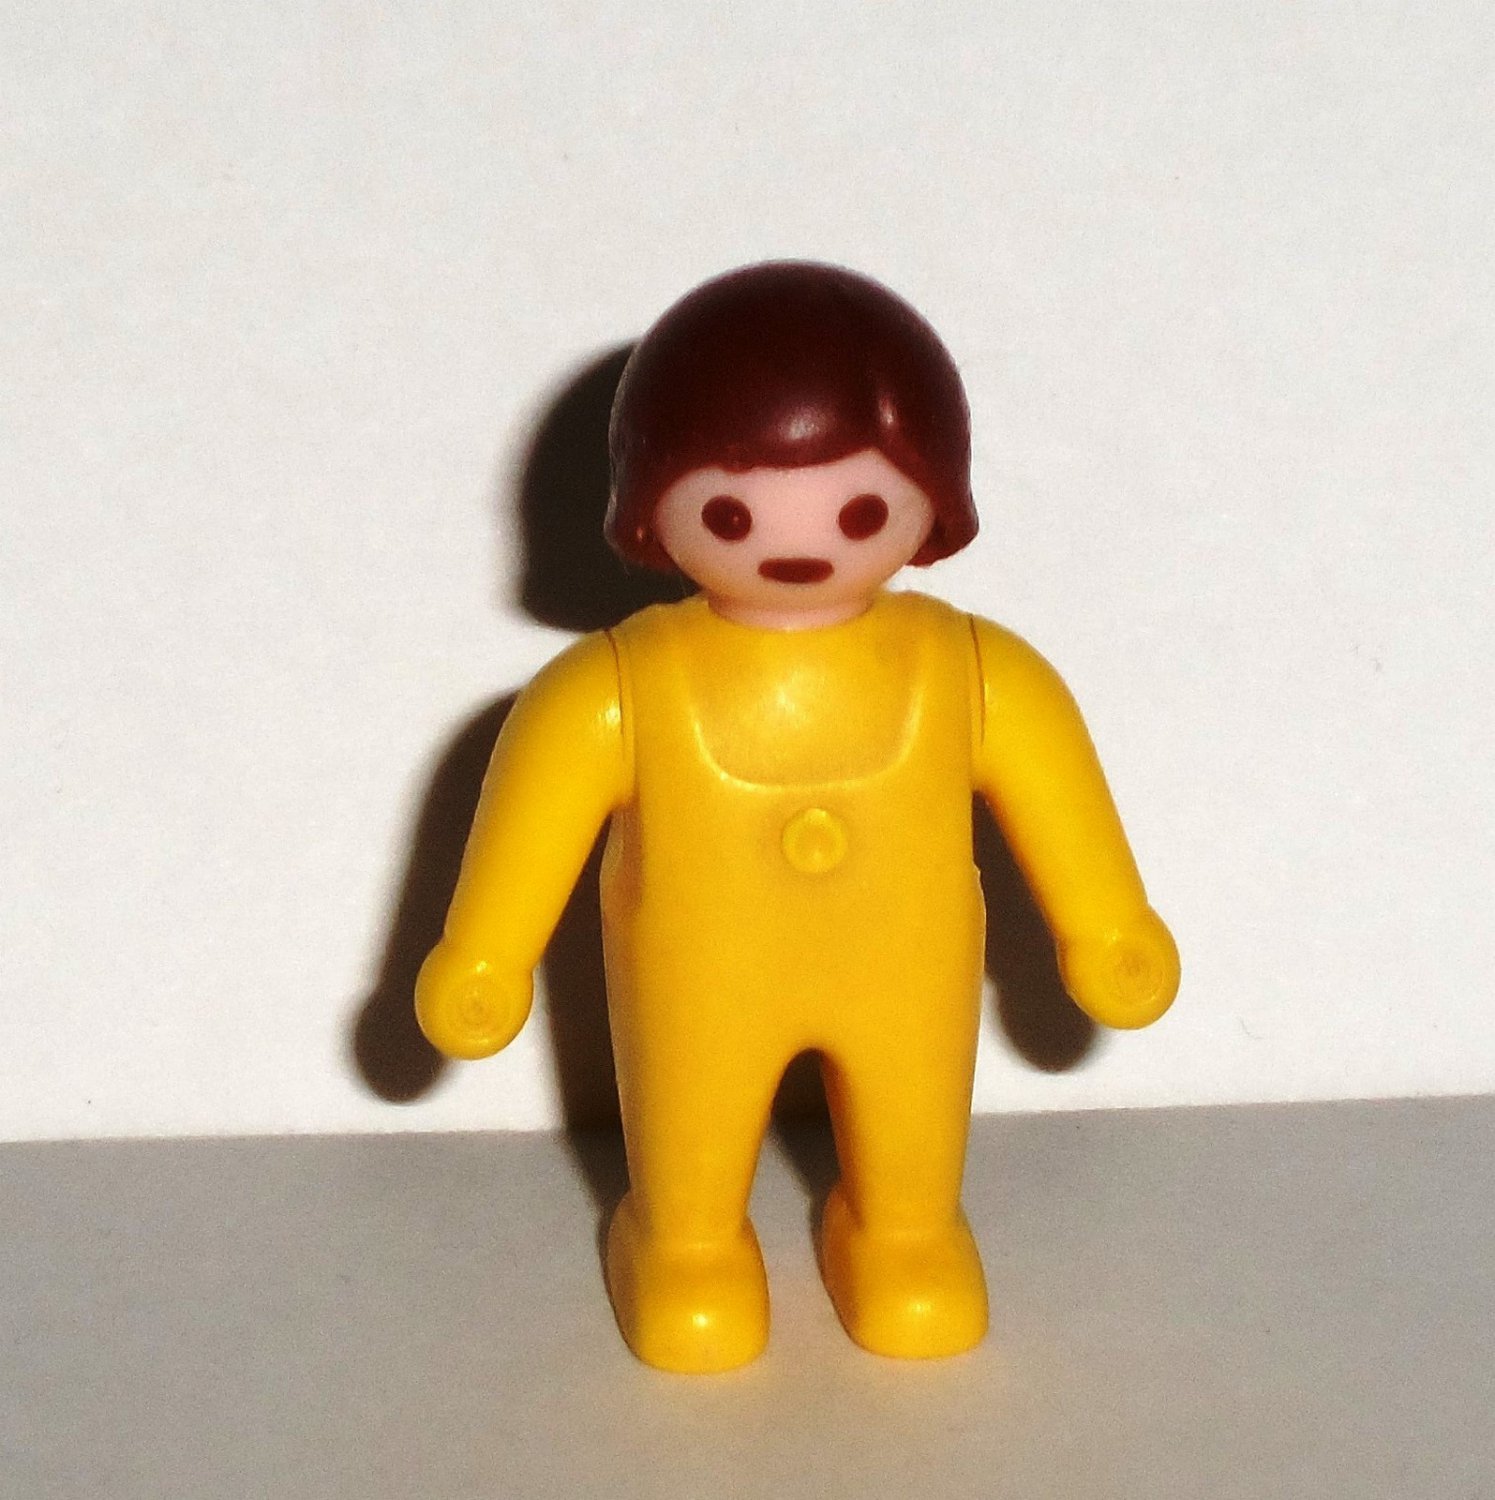 playmobil for toddlers